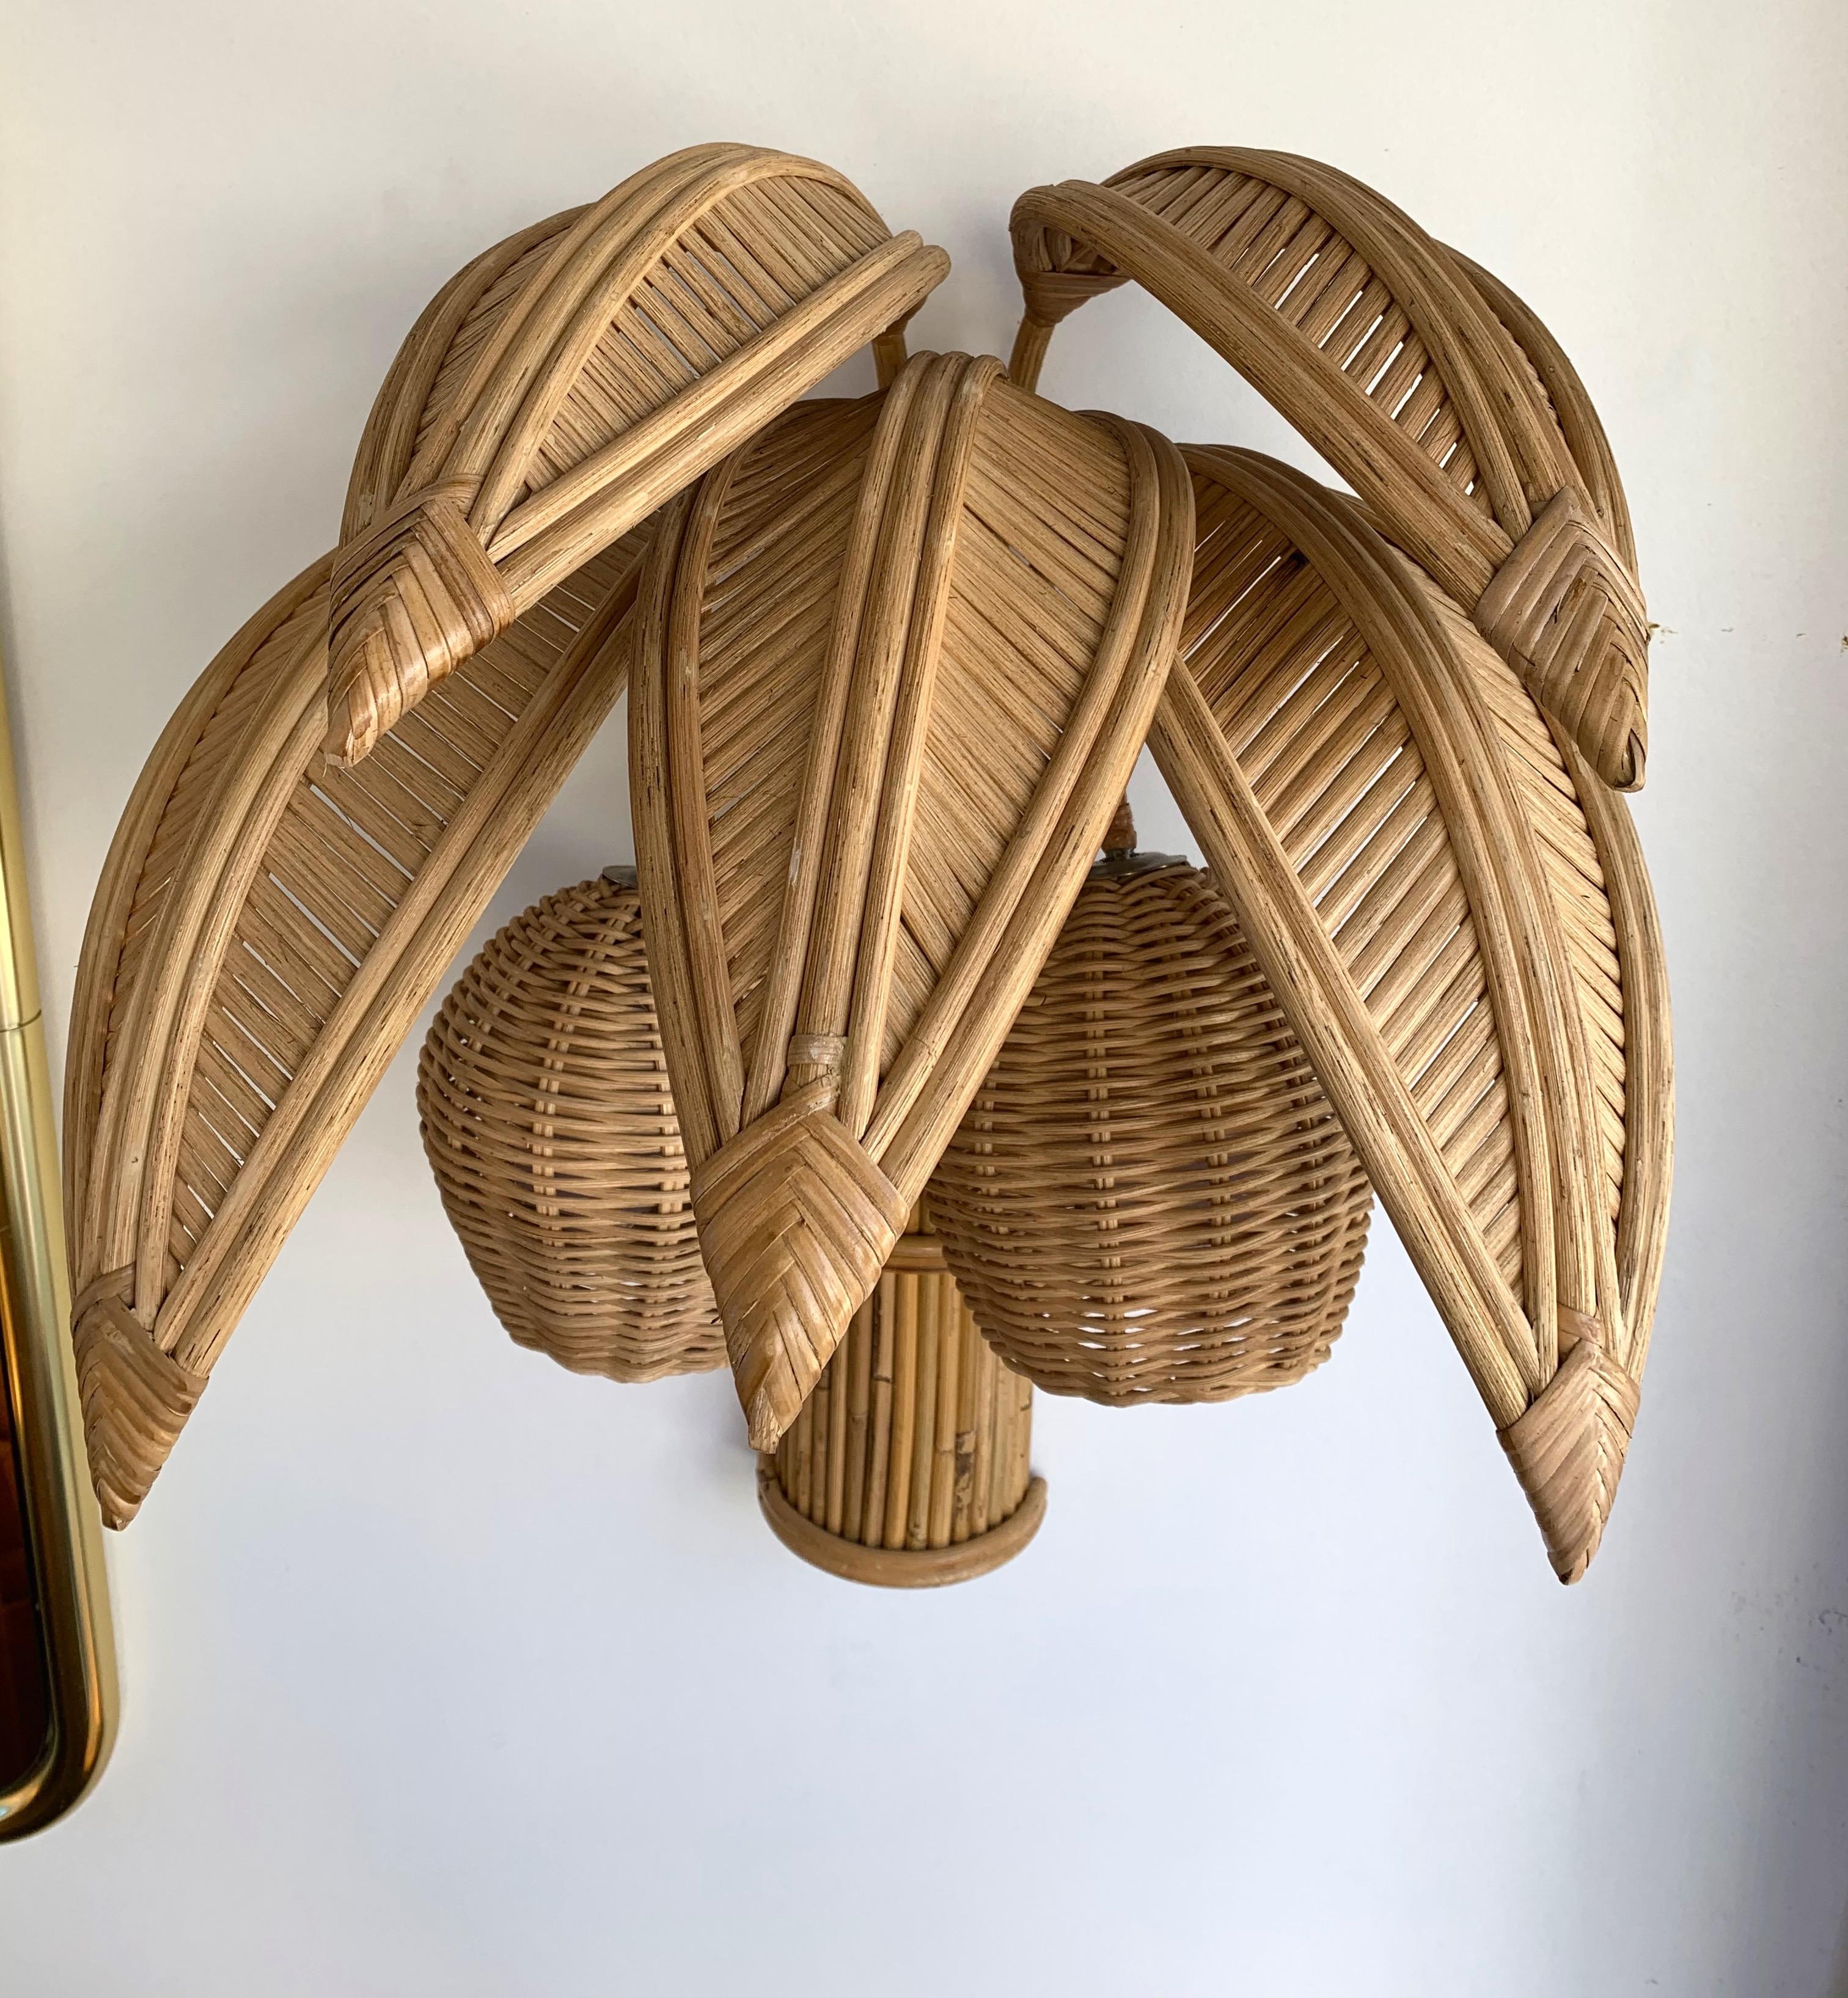 Pair of rattan coconut palm tree wall lights lamps sconces. In the style of Mario Lopez Torres, Galerie Maison & Jardin, Jansen, Dal Vera, Hollywood Regency.